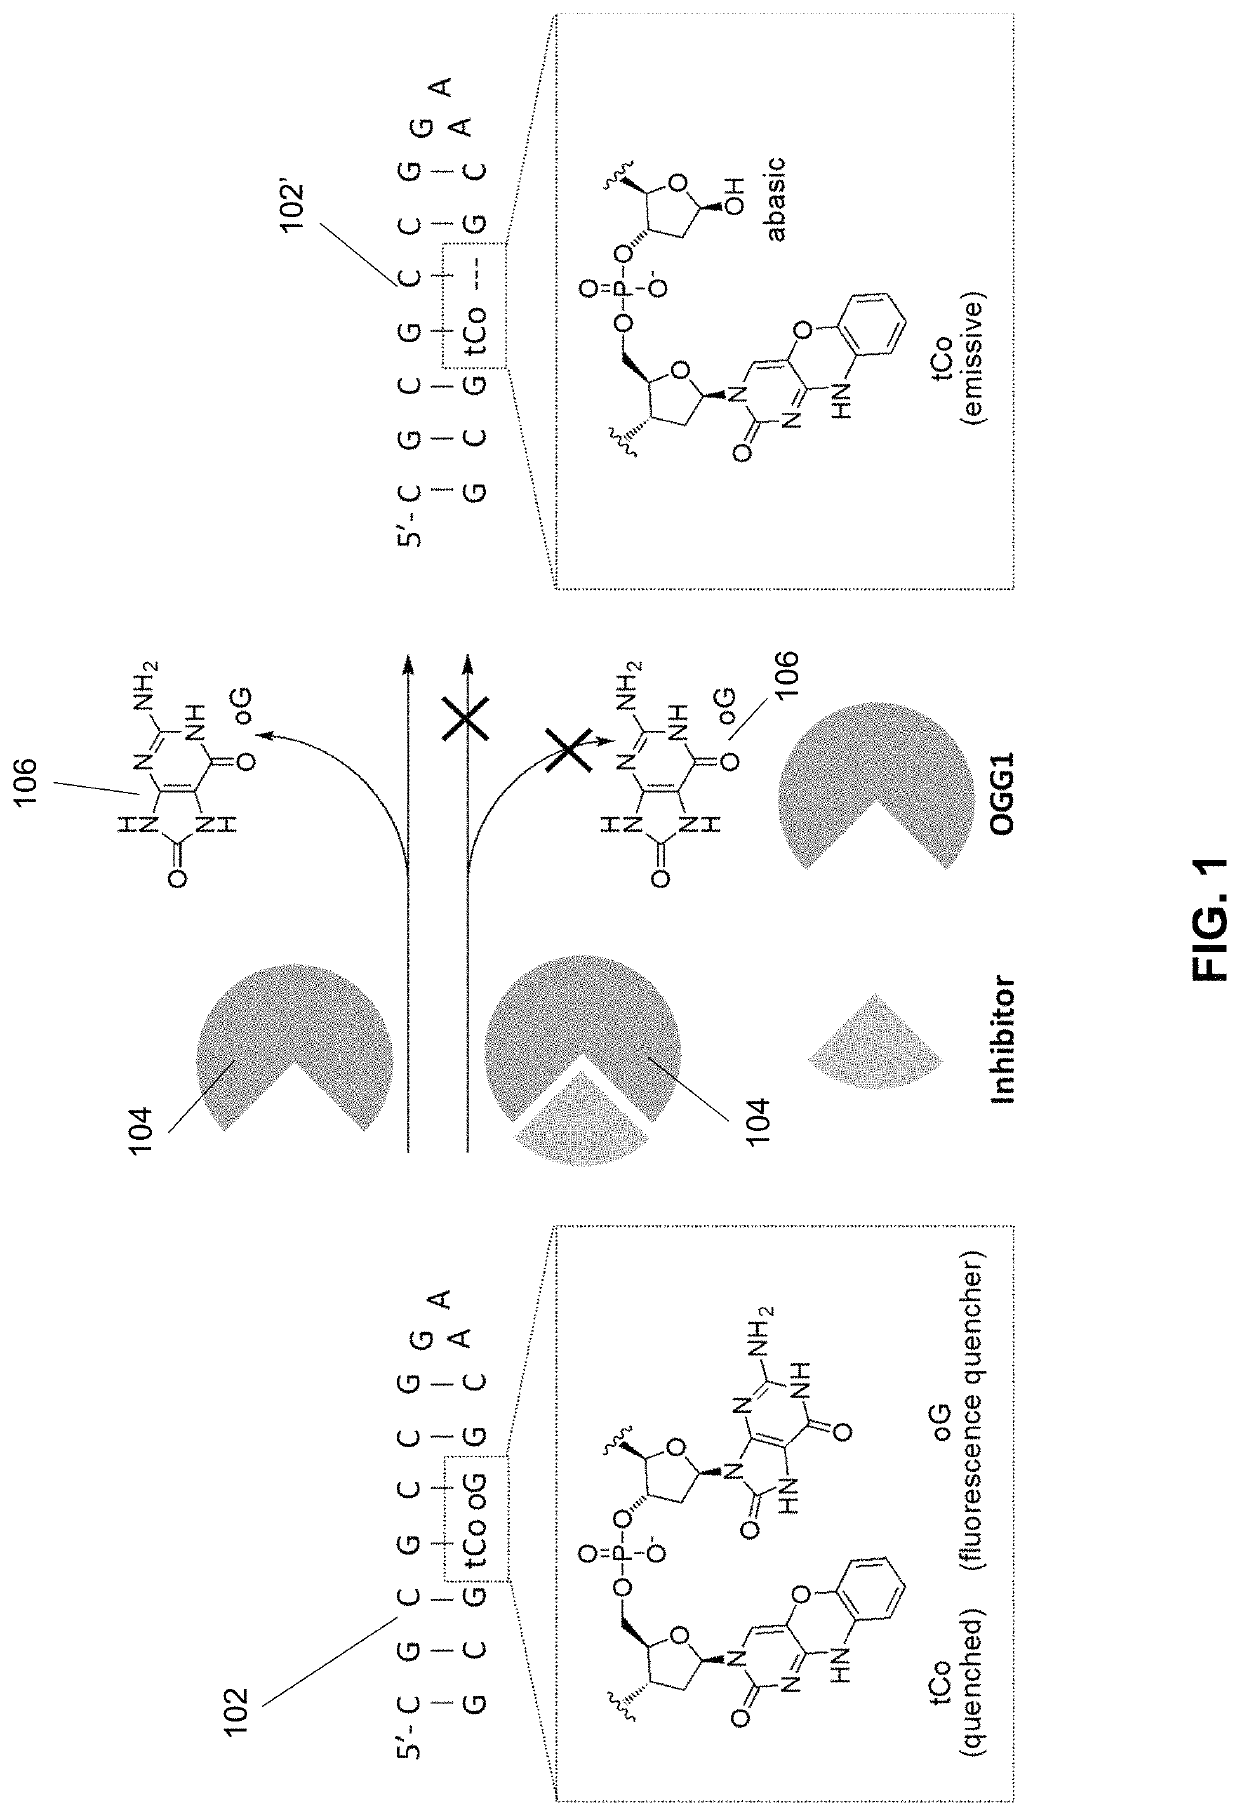 Substituted 1,2,3,4-tetrahydroquinolines as inhibitors of repair enzyme 8-oxoguanine deoxyribonucleic acid glycosylase activity